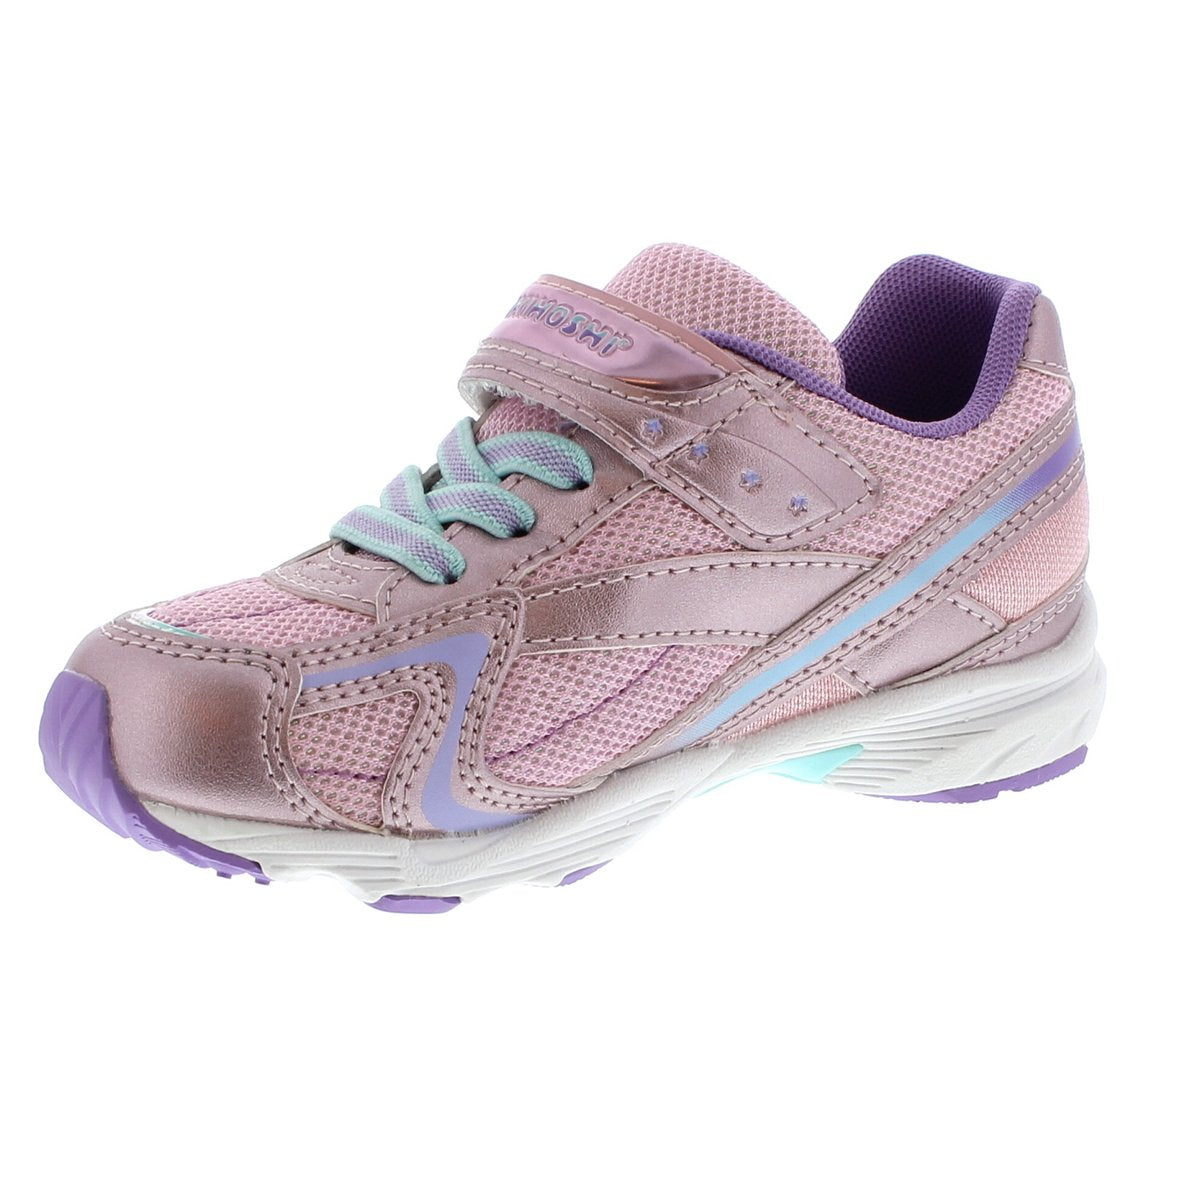 Child Tsukihoshi Glitz Sneaker in Rose/Lavender from the front view